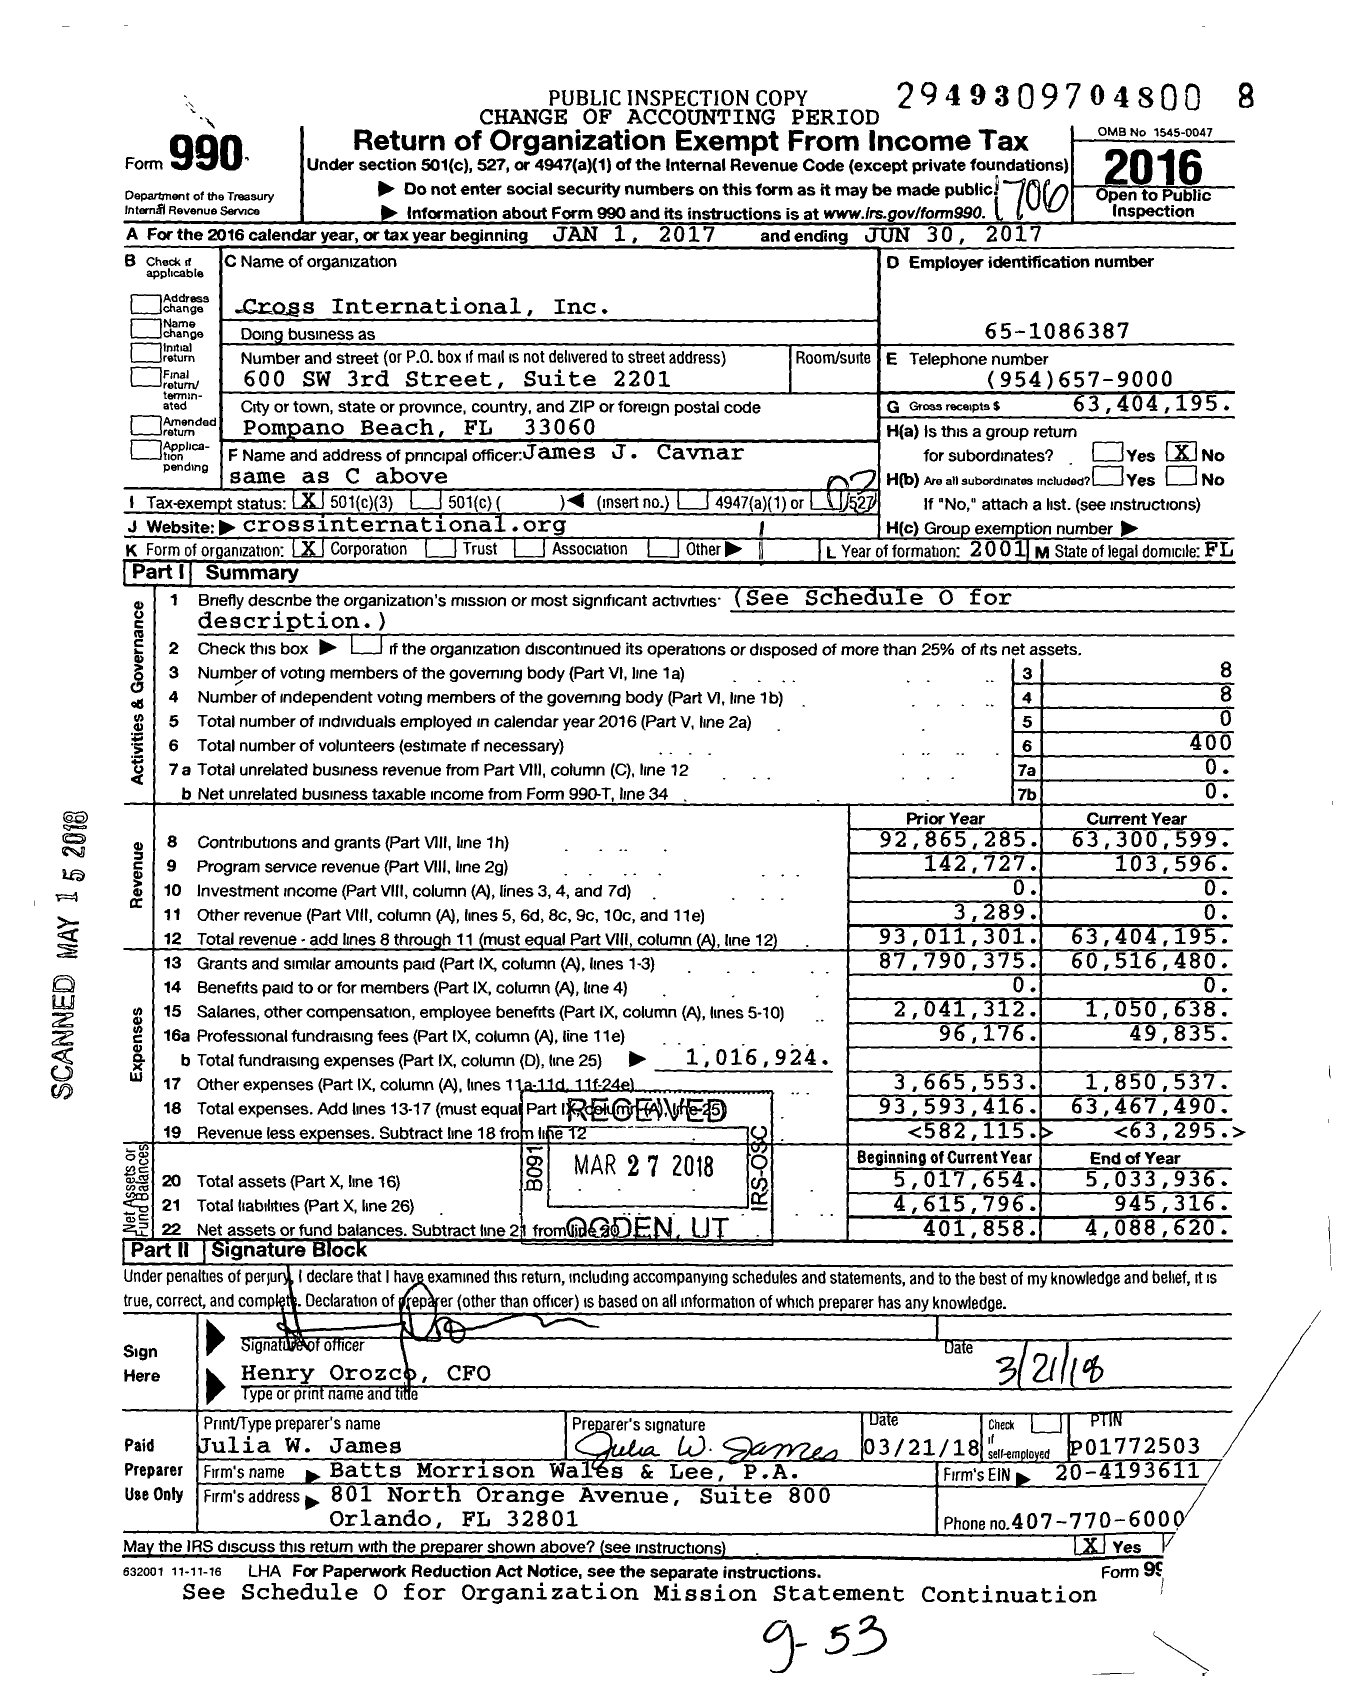 Image of first page of 2016 Form 990 for Cross International